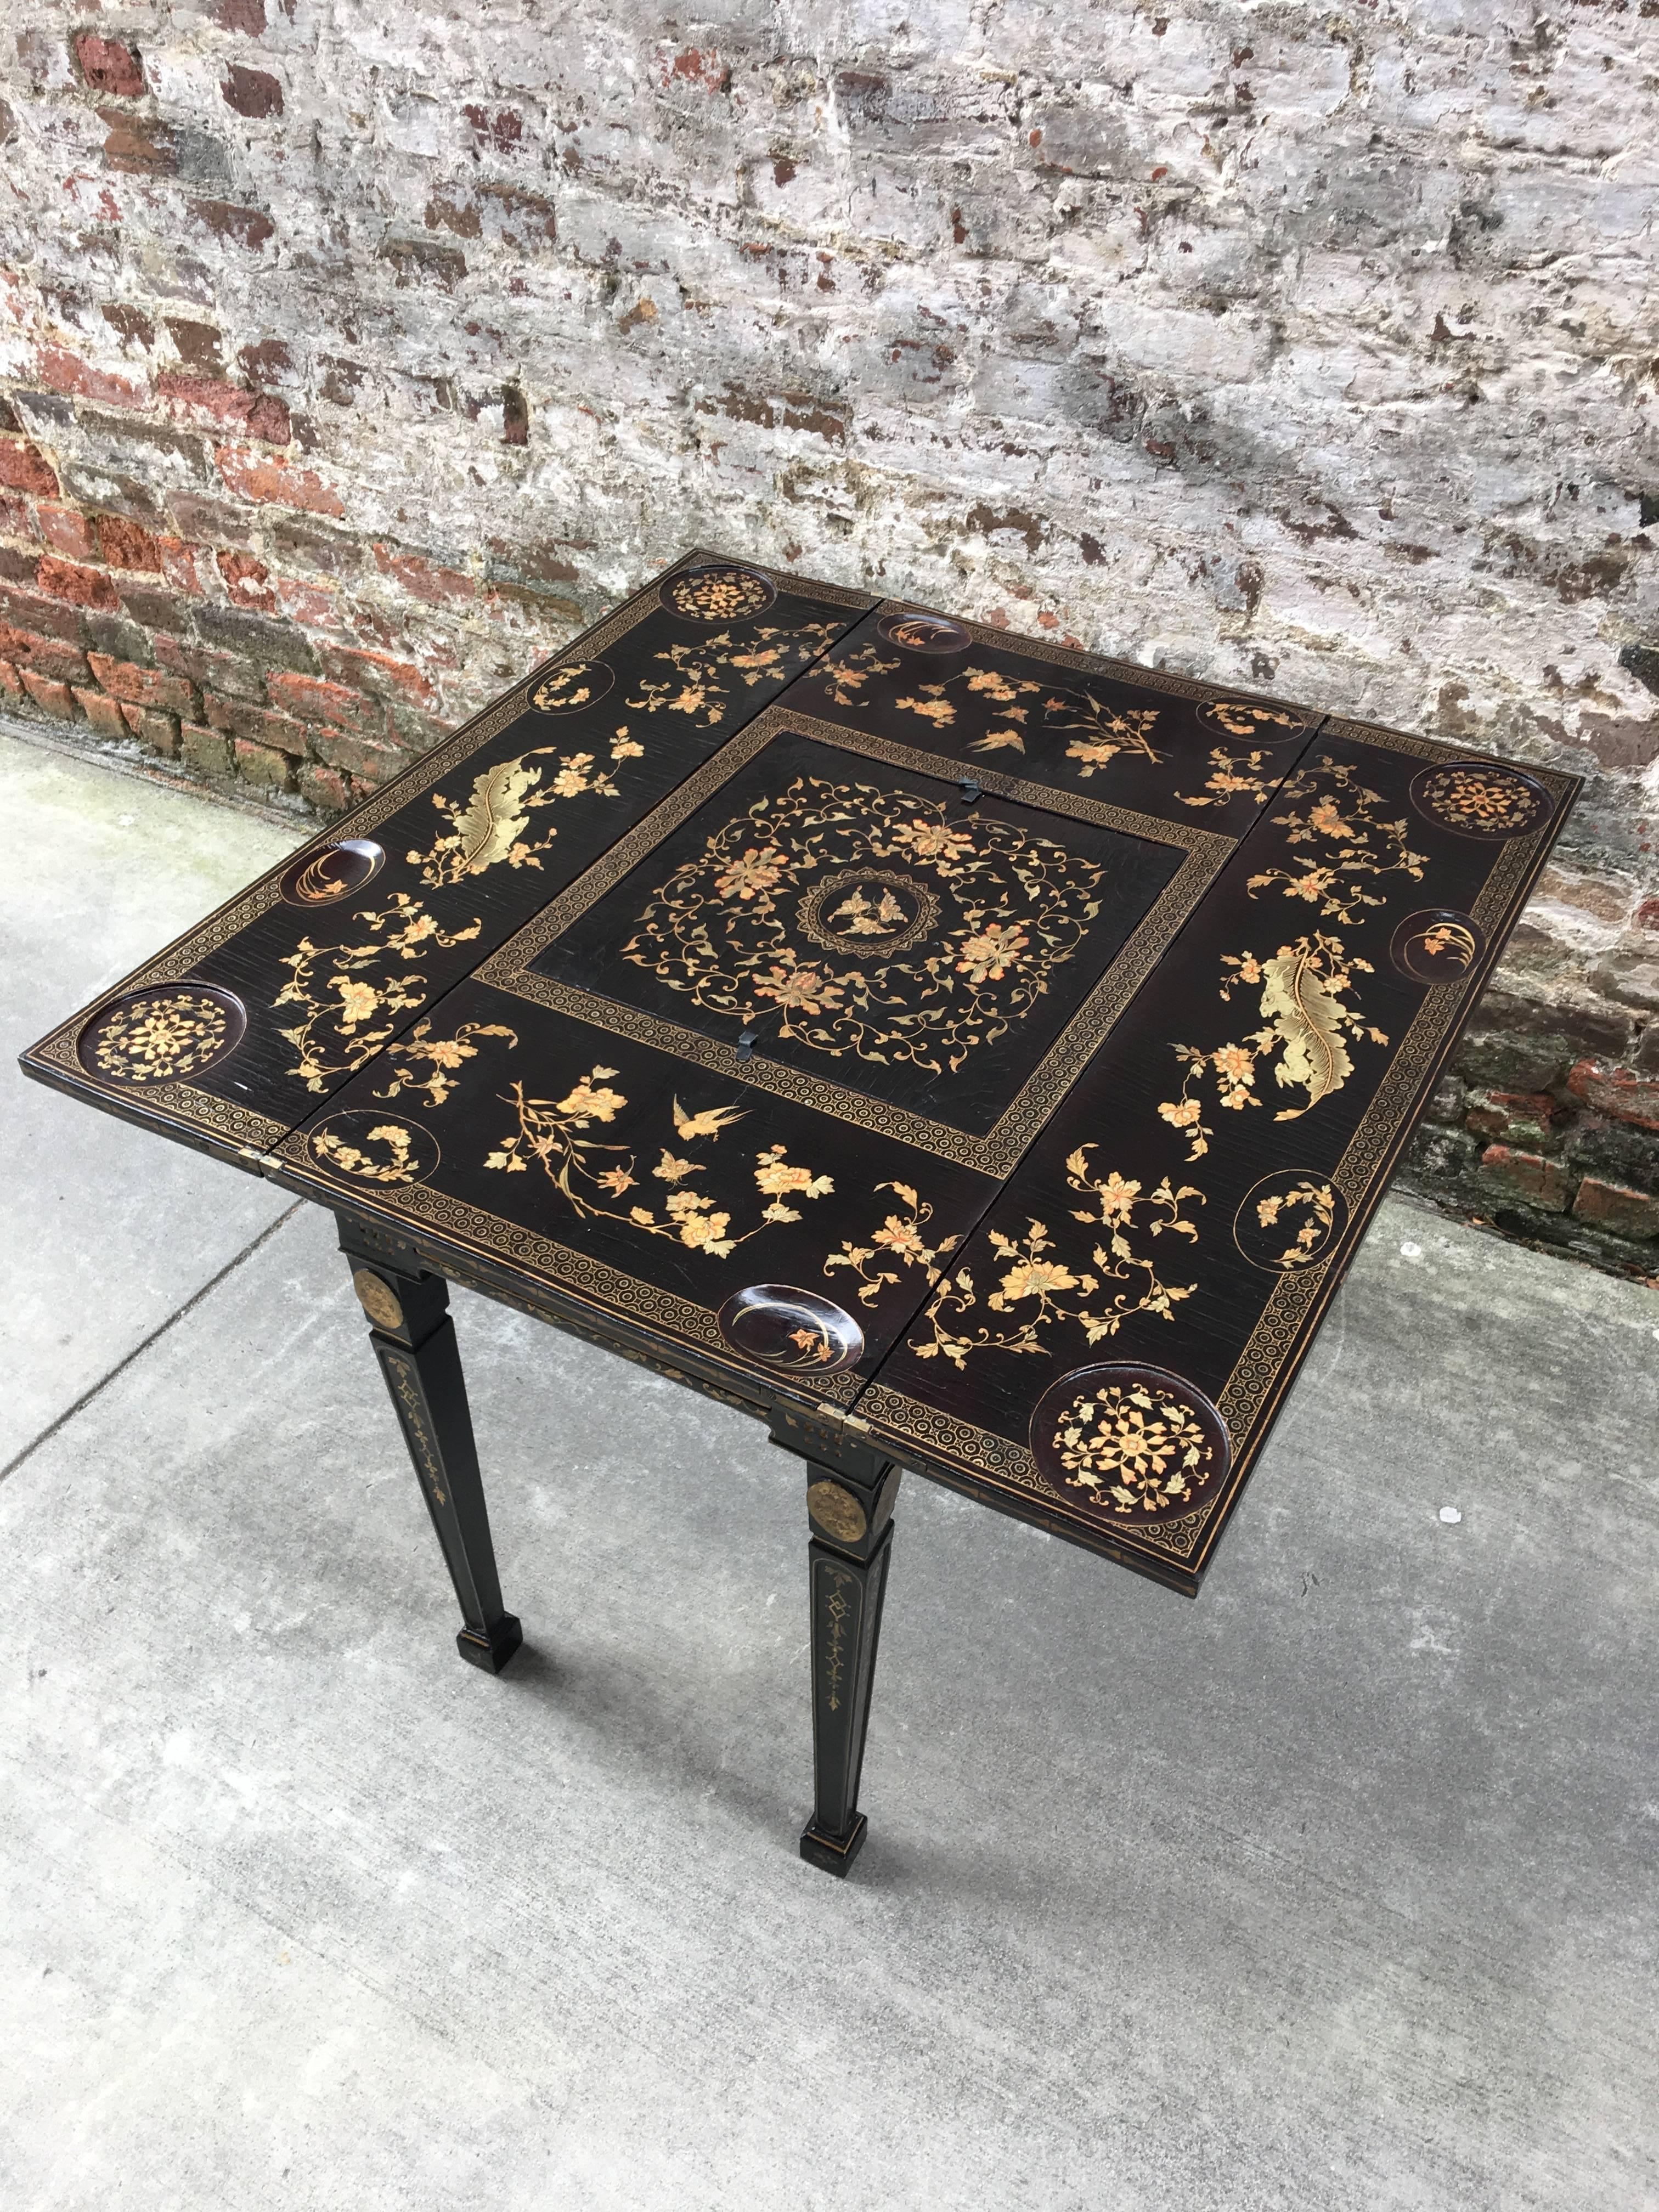 English Chinese Export Chinoiserie Games Table early 19th century